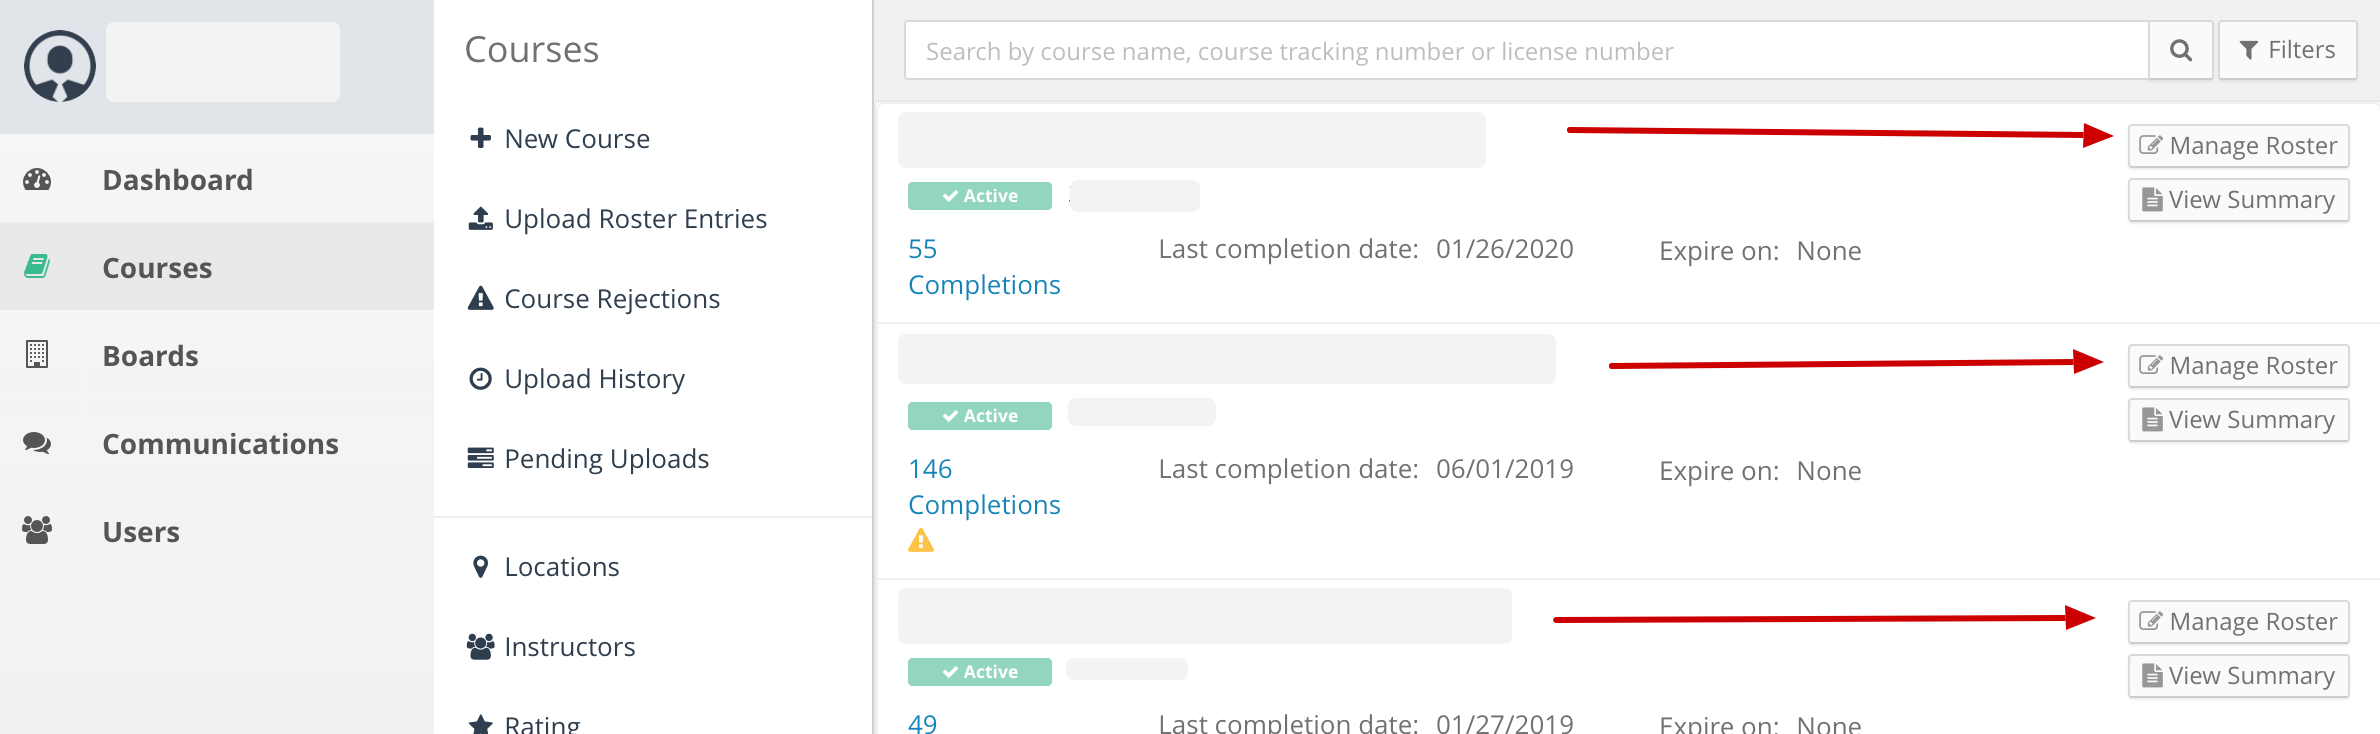 Screenshot of a provider course list page. Arrows point to the Roster buttons next to each course.